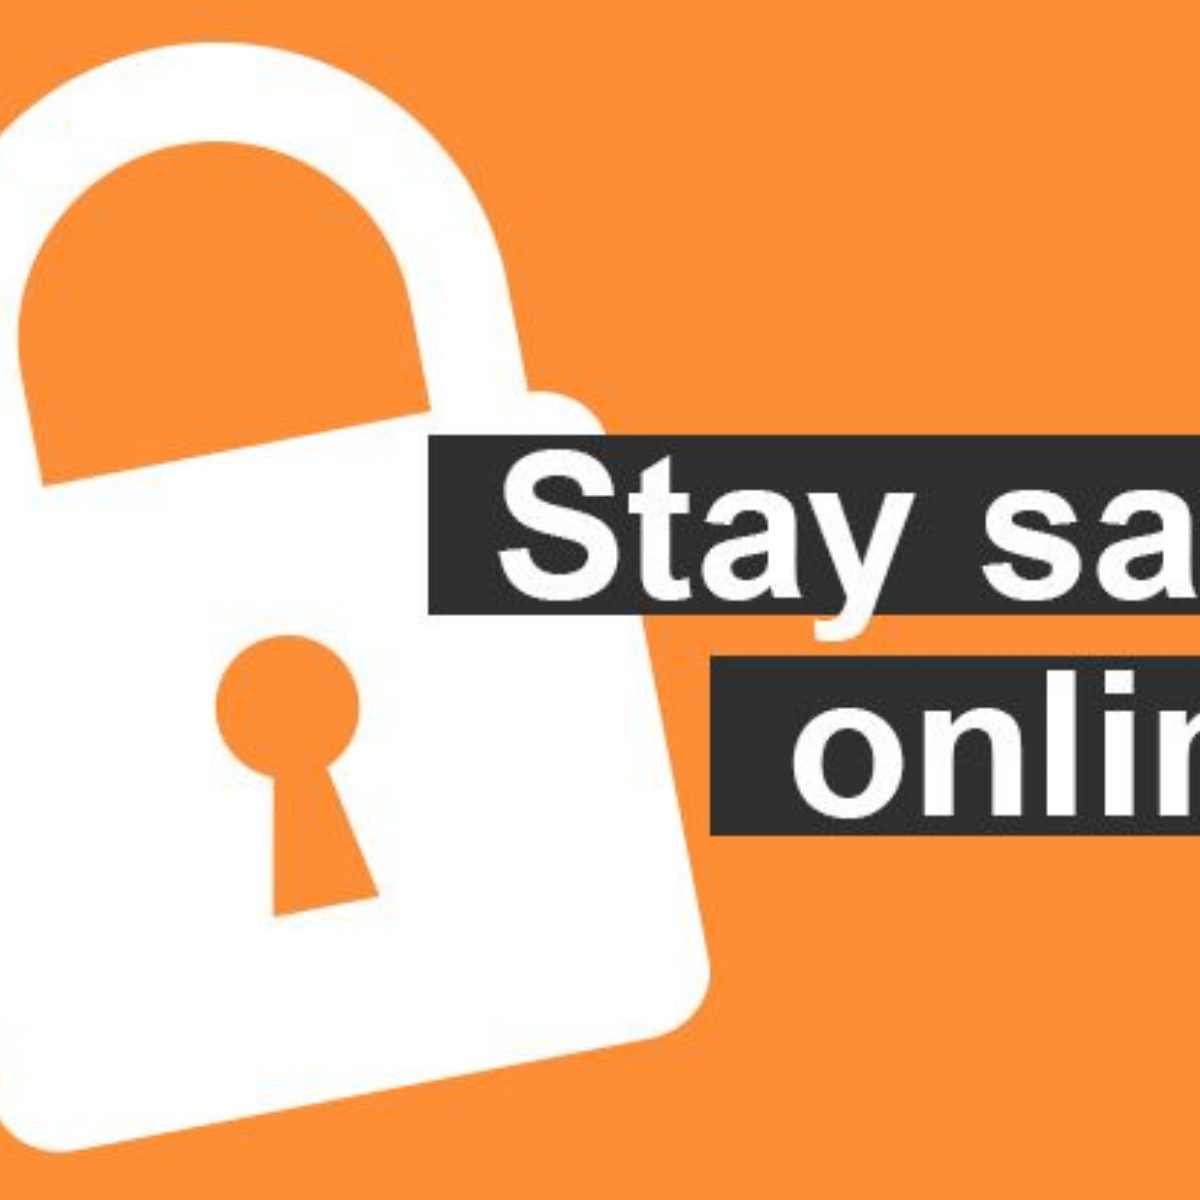 Poppy Playtime: Online Safety Review - Safer Schools